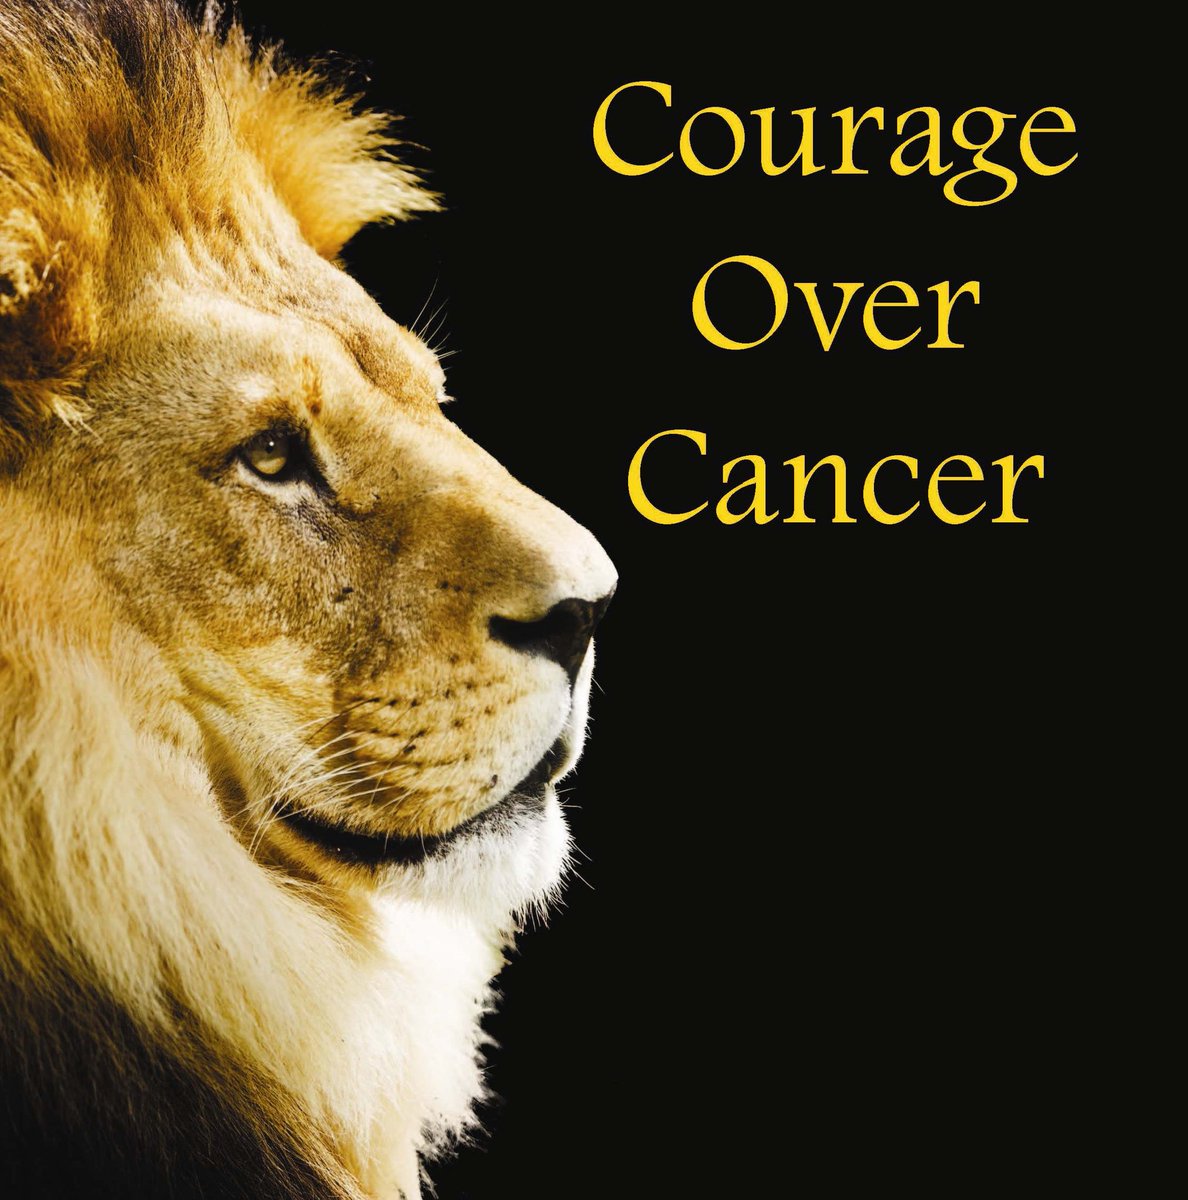 Give someone the gift of #courage and #inspiration to fight #cancer with this book of photos and #inspirationalquotes. Avail. via Amazon, BN, IndieBound, and select retailers. Learn more at cravepress.com. #TBT #ICYMI #bookrelease